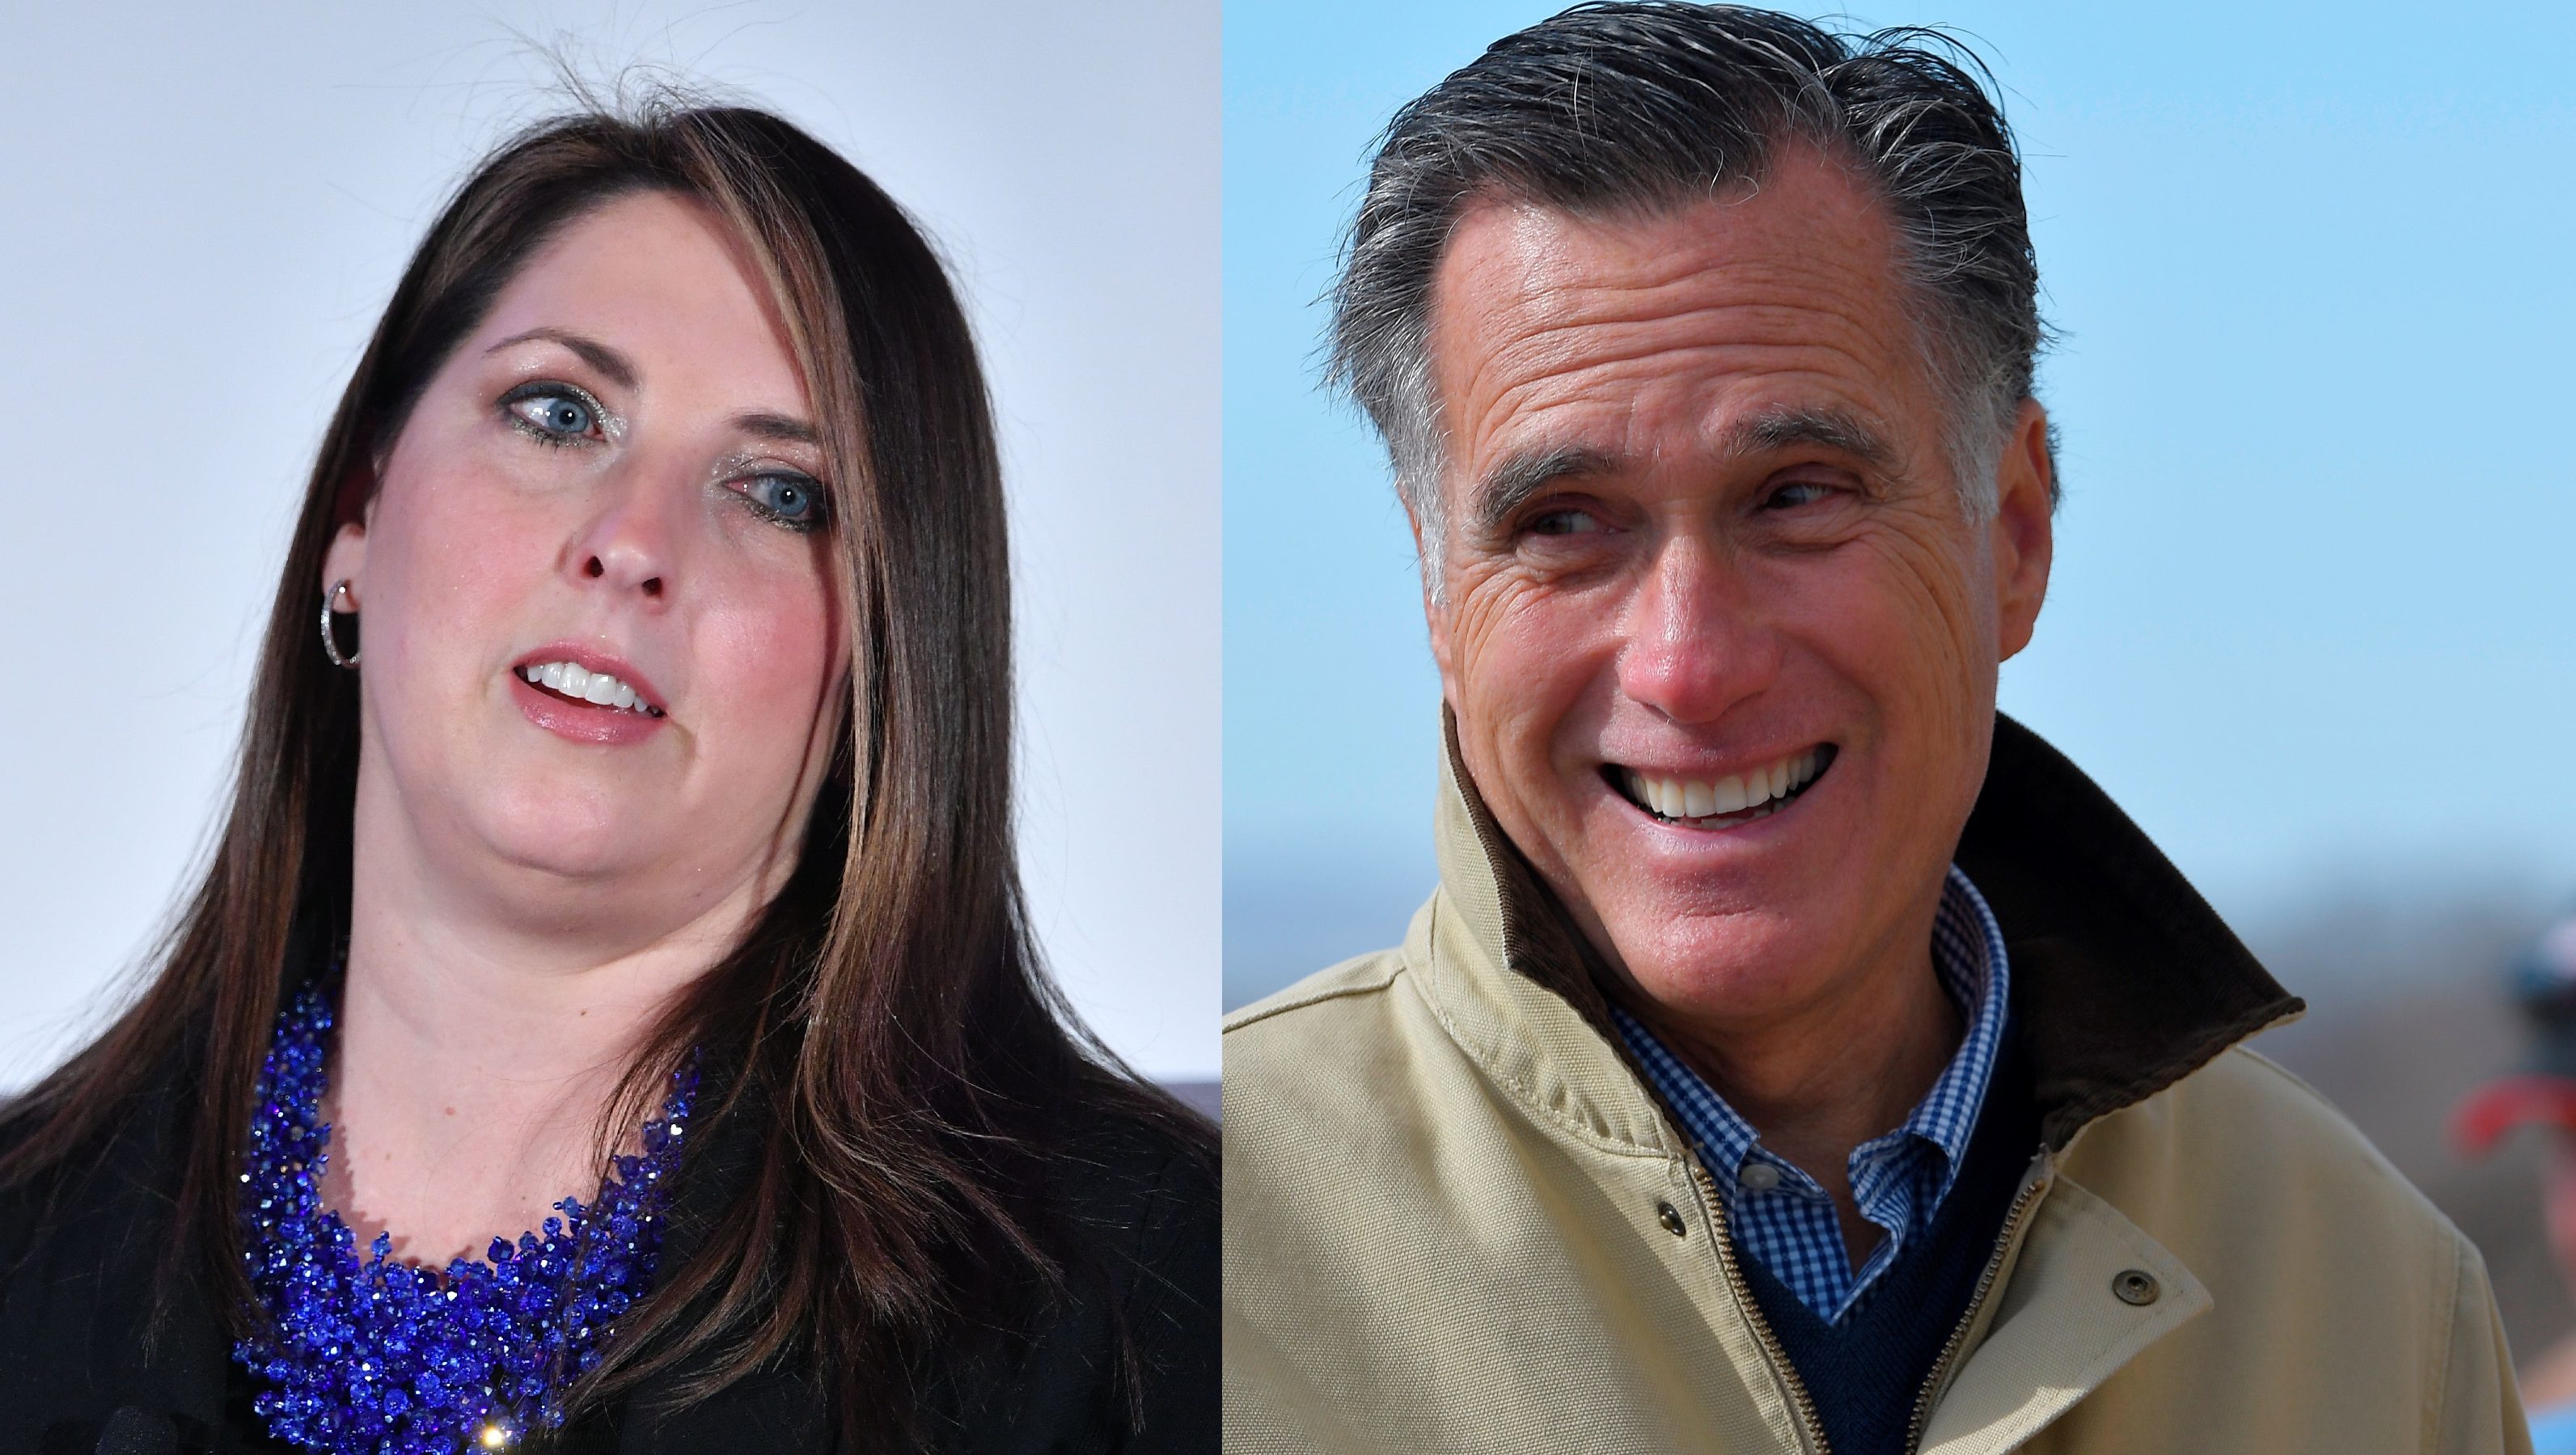 Ronna McDaniel & Mitt Romney How Are They Related?